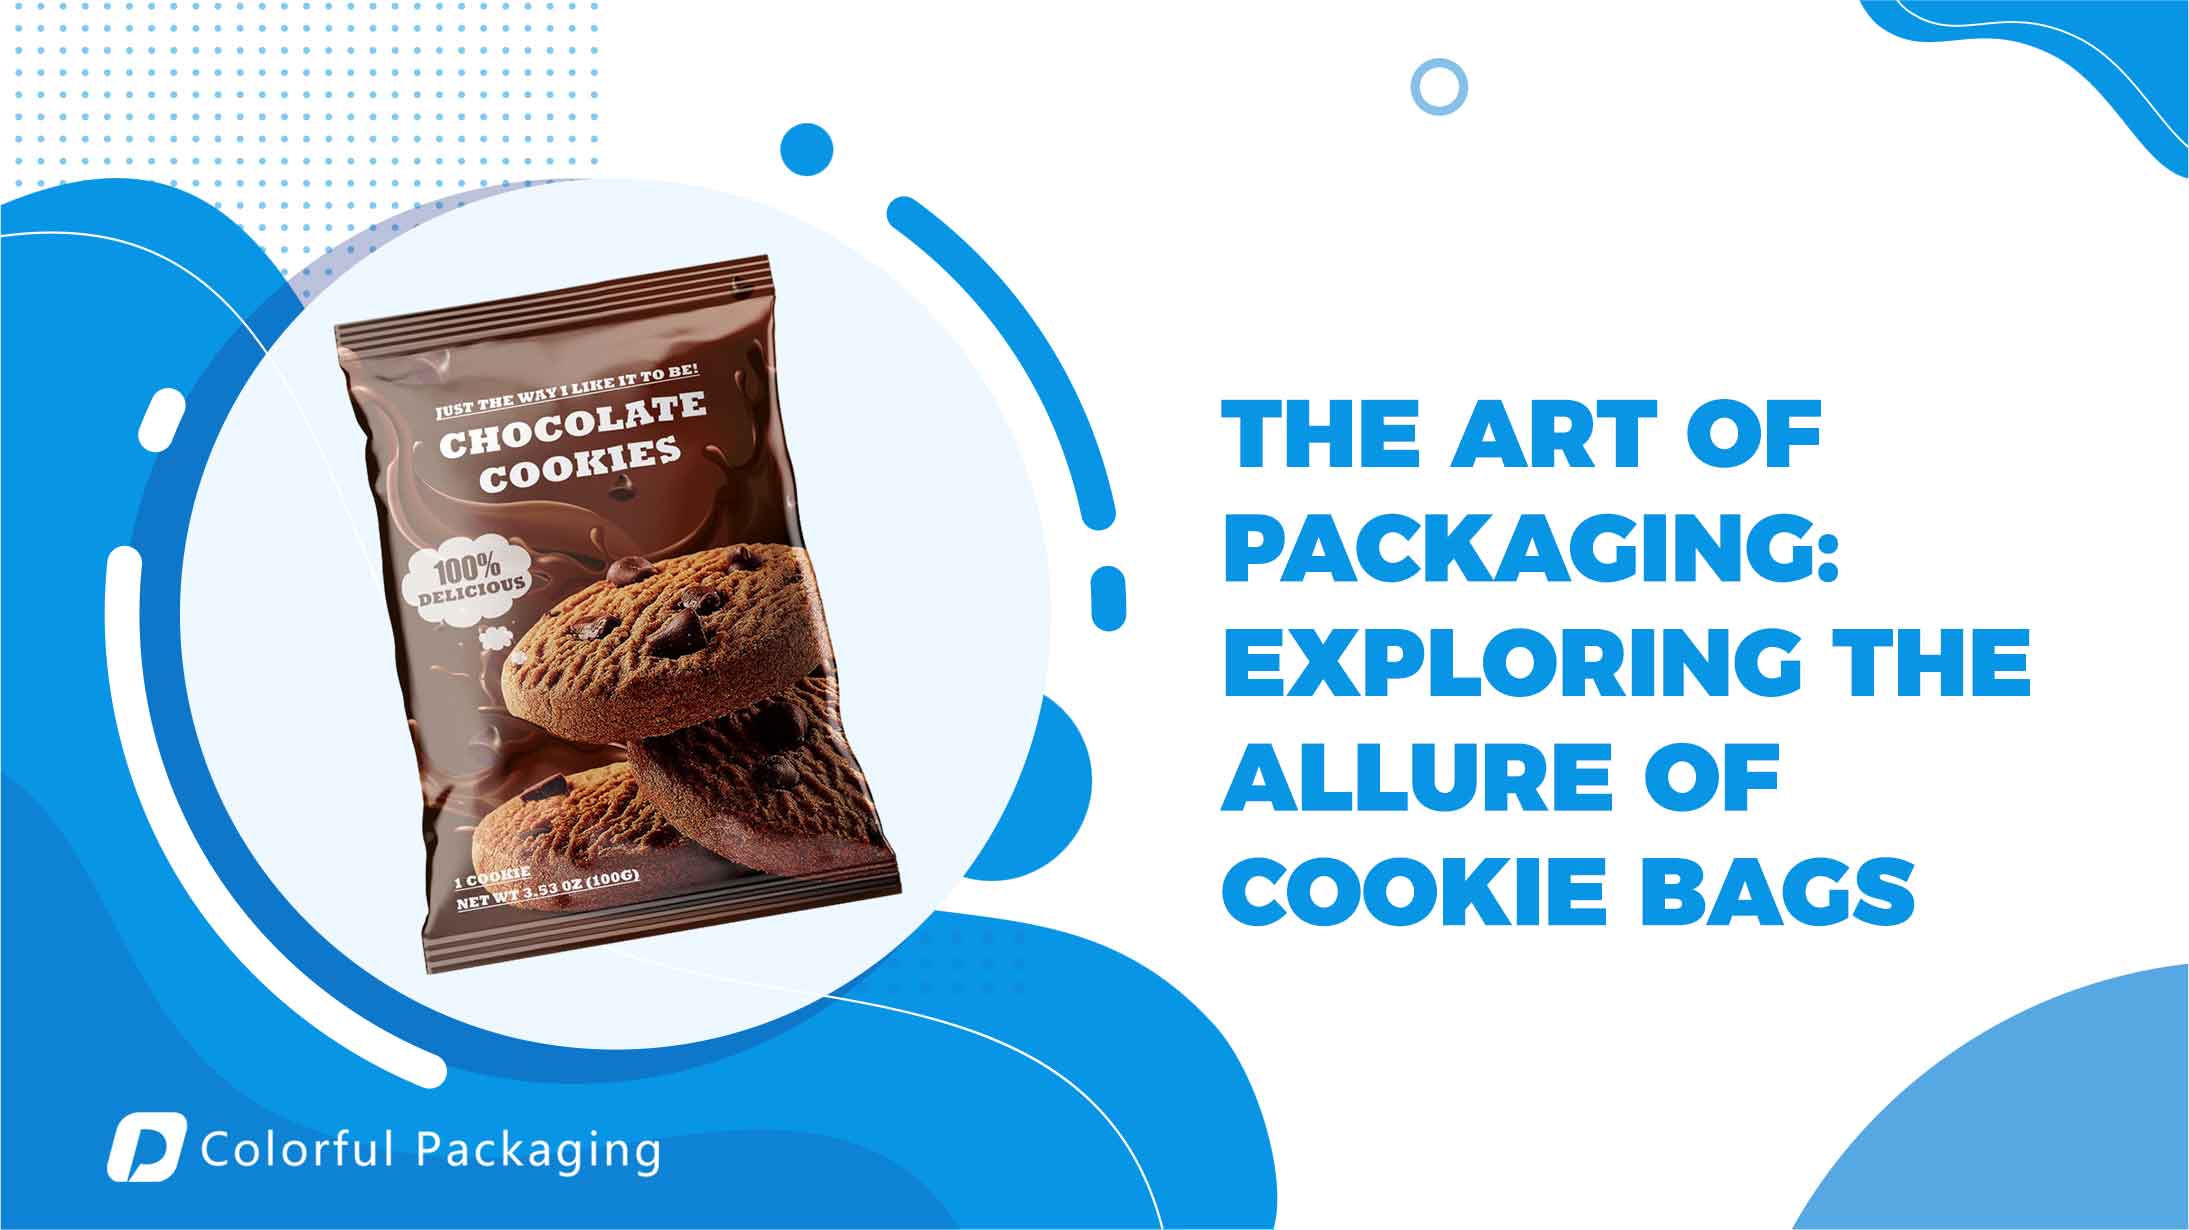 The Art of Packaging: Exploring the Allure of Cookie Bags